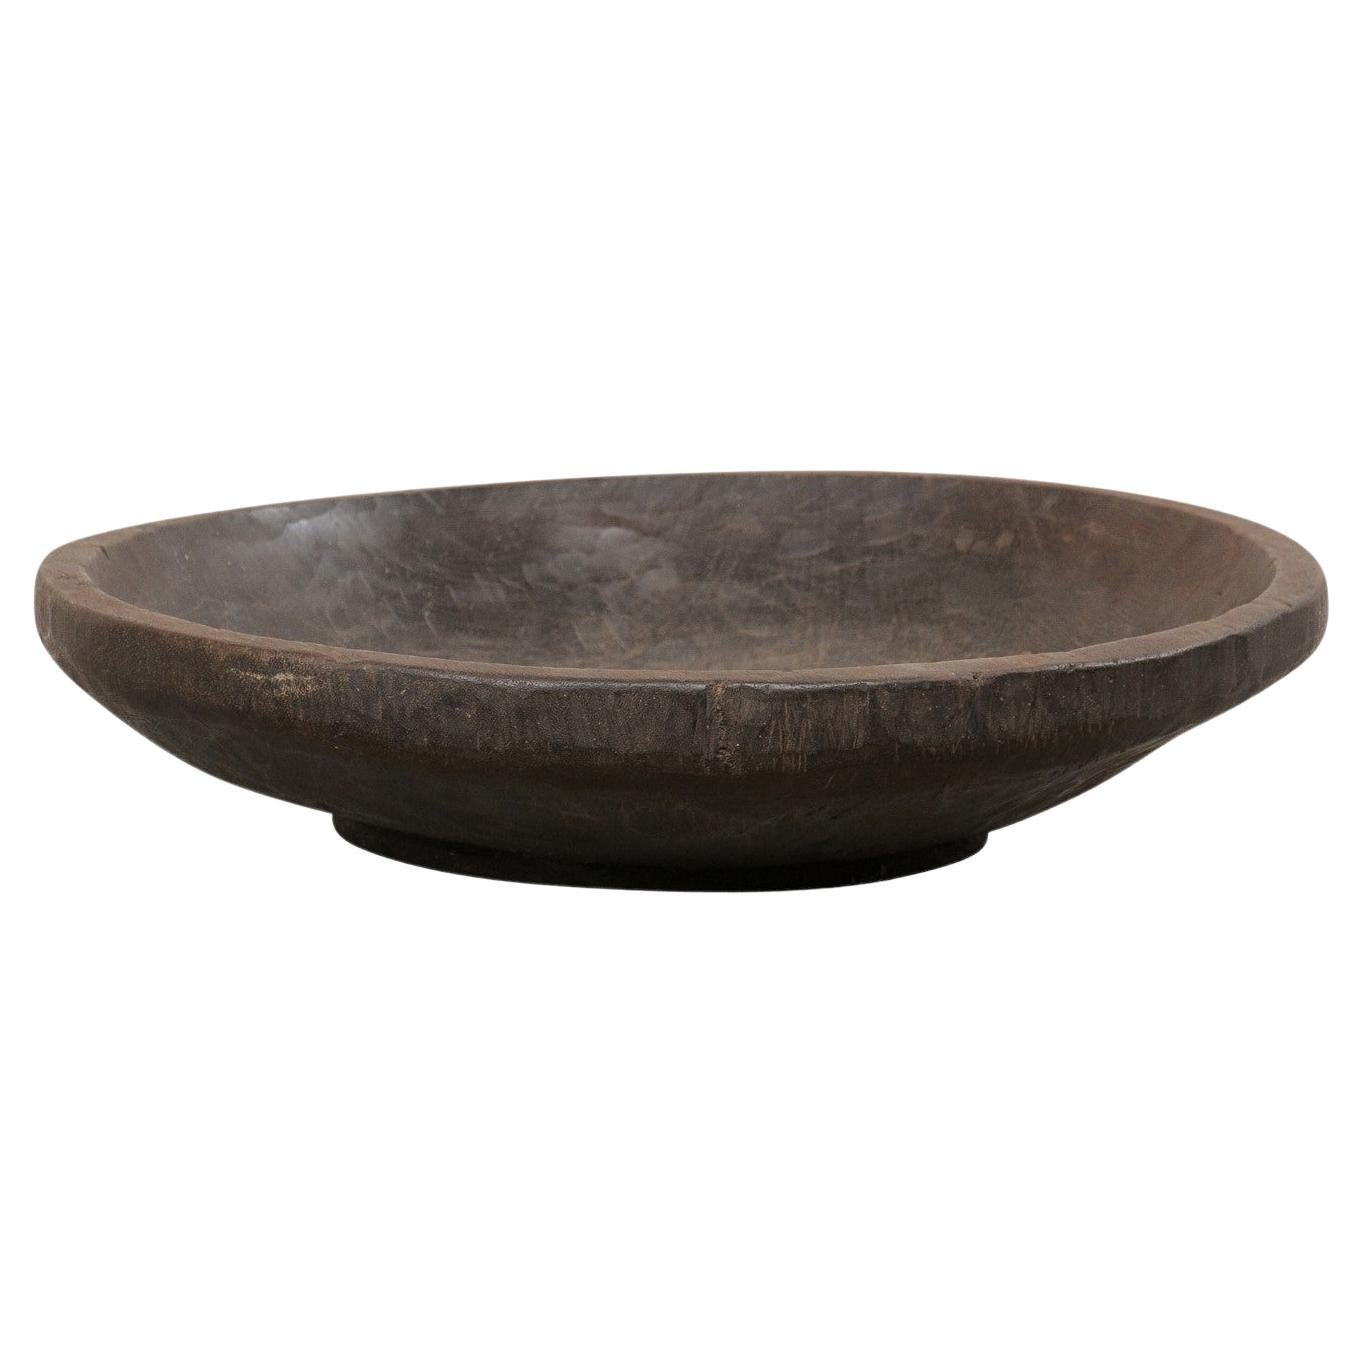 Sumatran Antique Tropical Hardwood Bowl Hand-Carved from a Single Piece of Wood